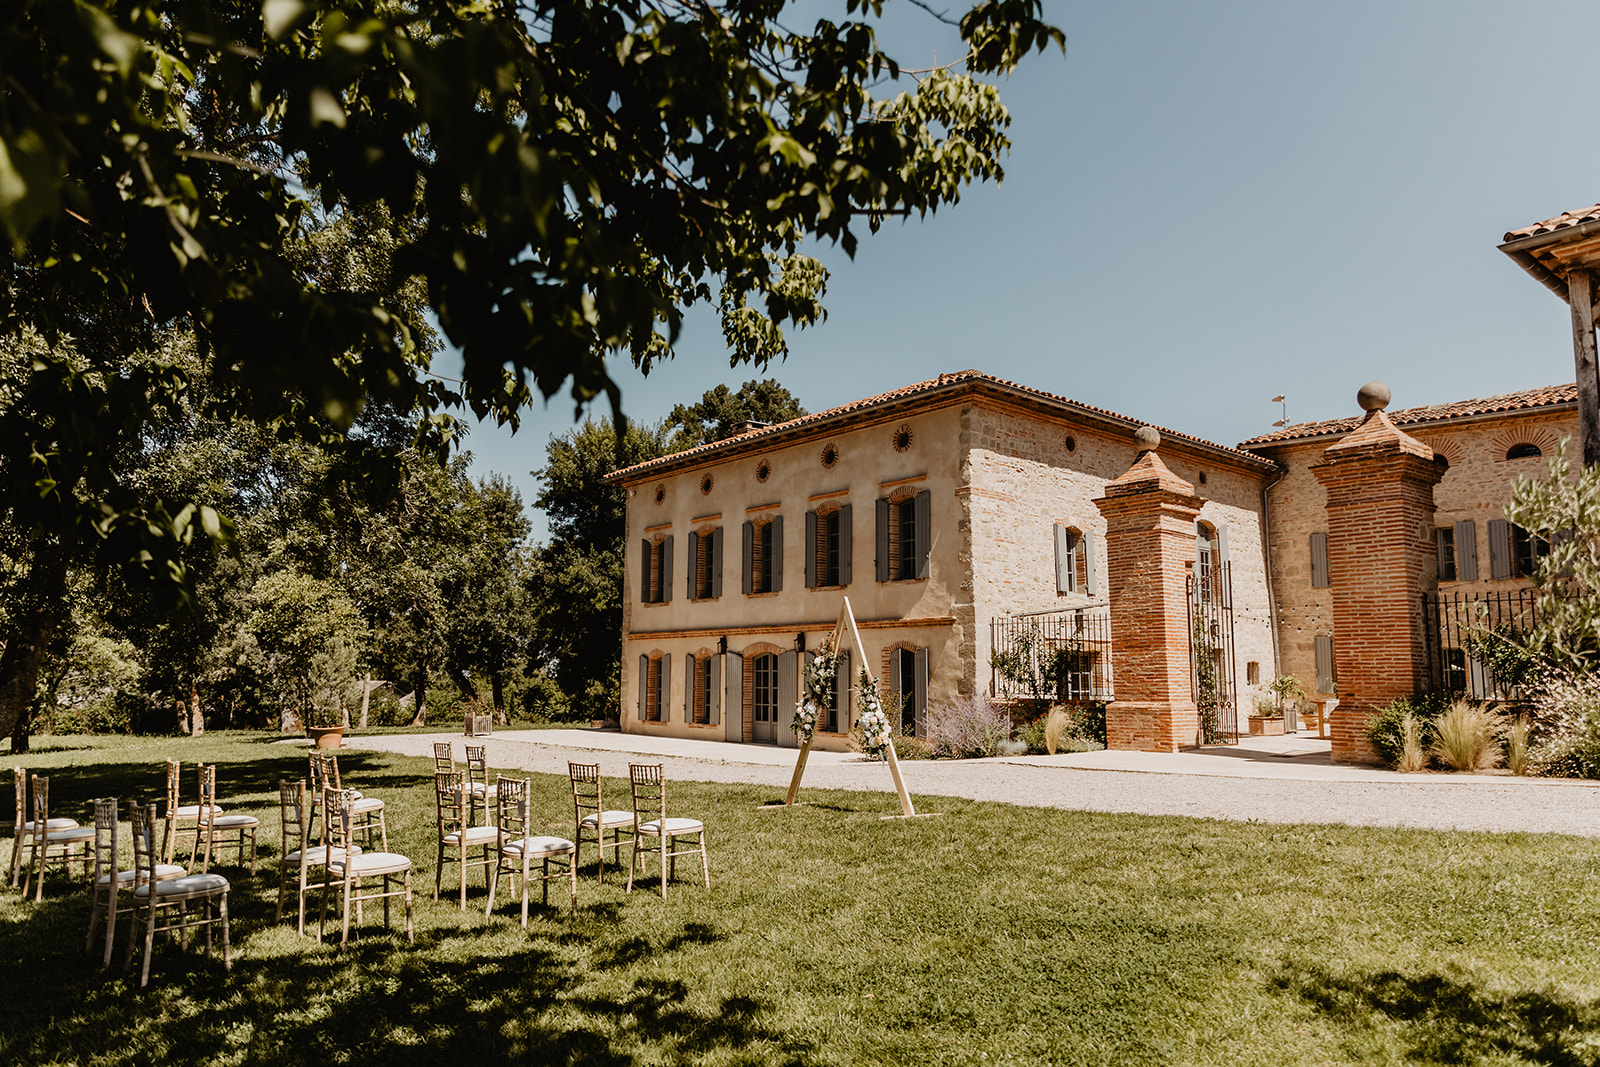 Marzens villa setup for a France Destination Wedding. Photography and Videography by Olive Joy Photography